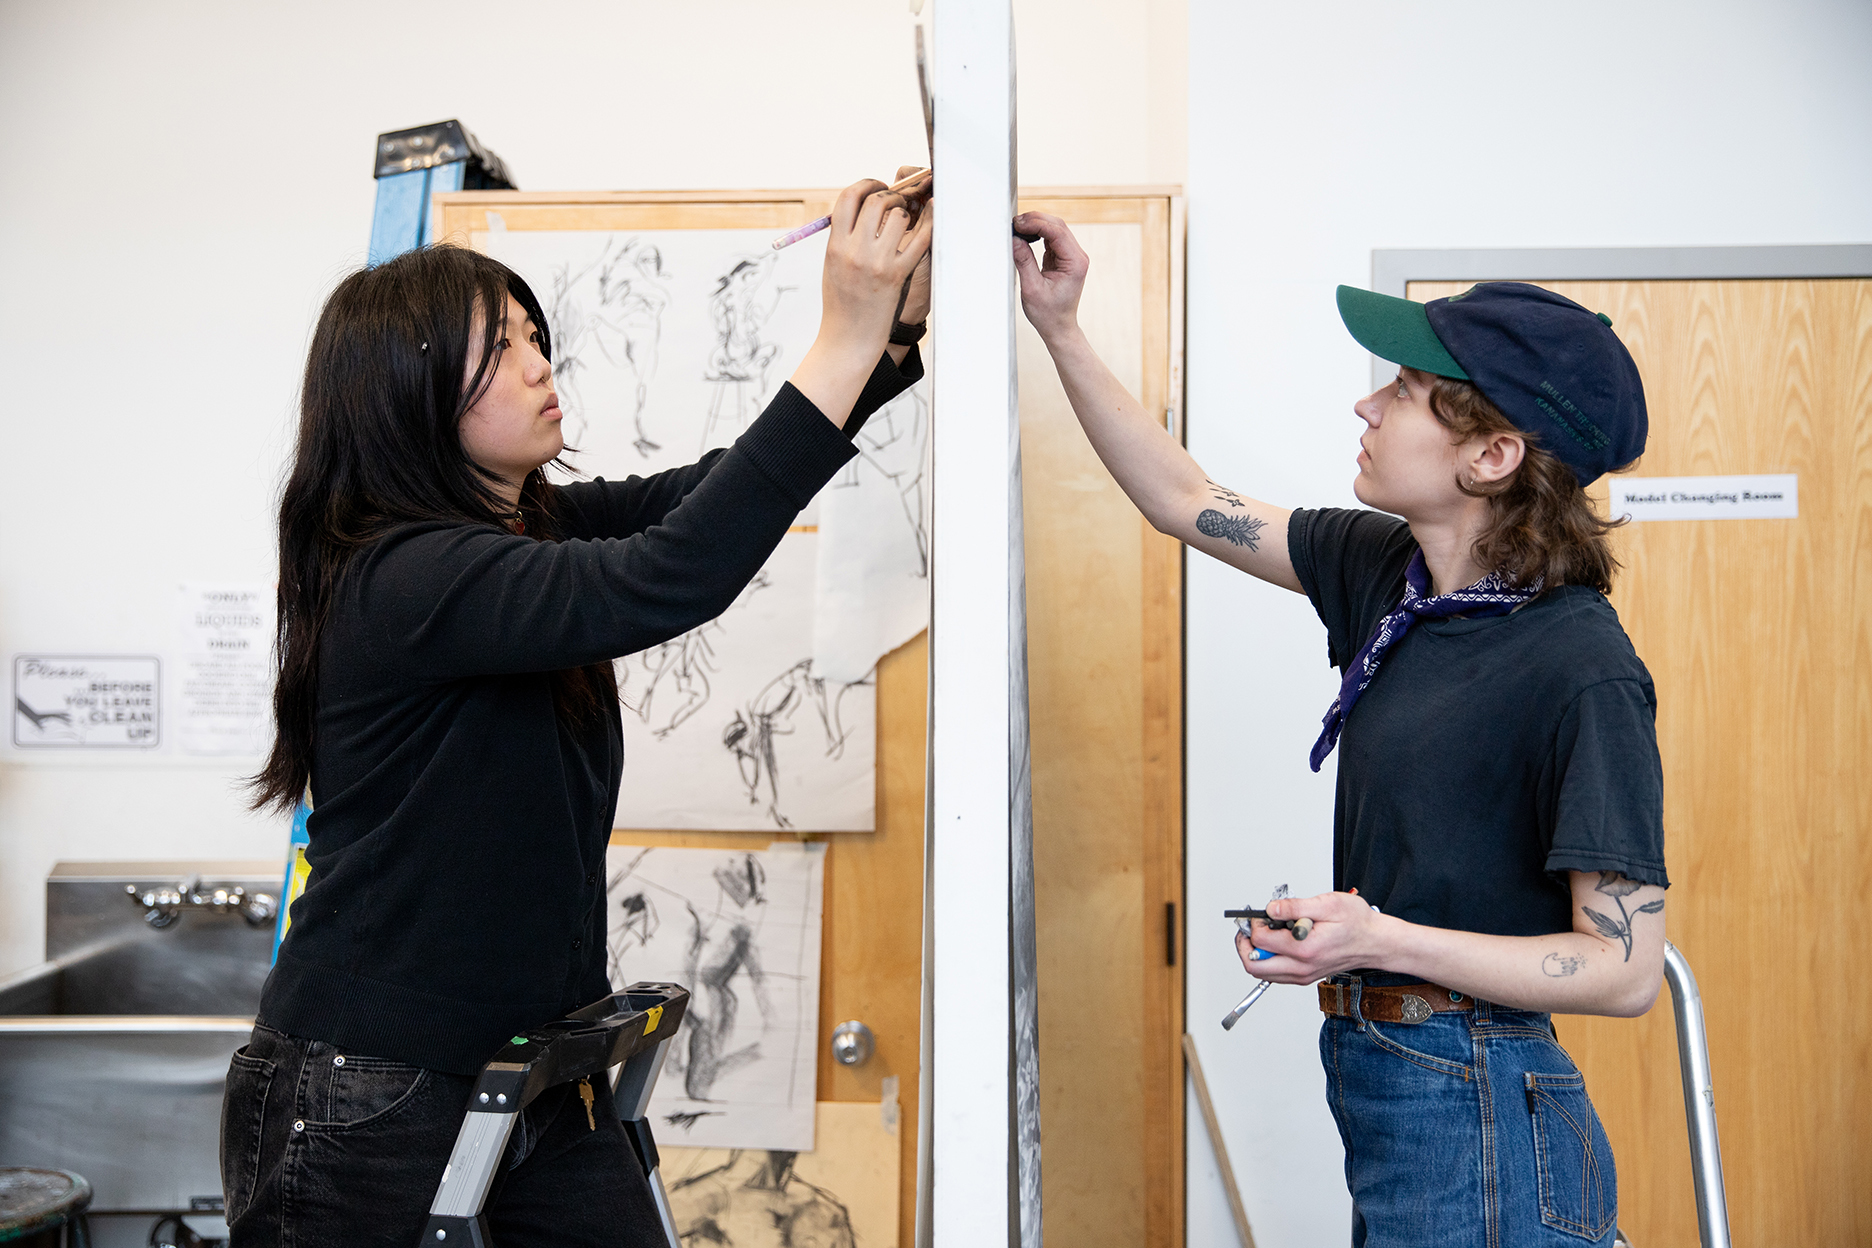 Two people work on separate drawings hung on either side of a room divider.